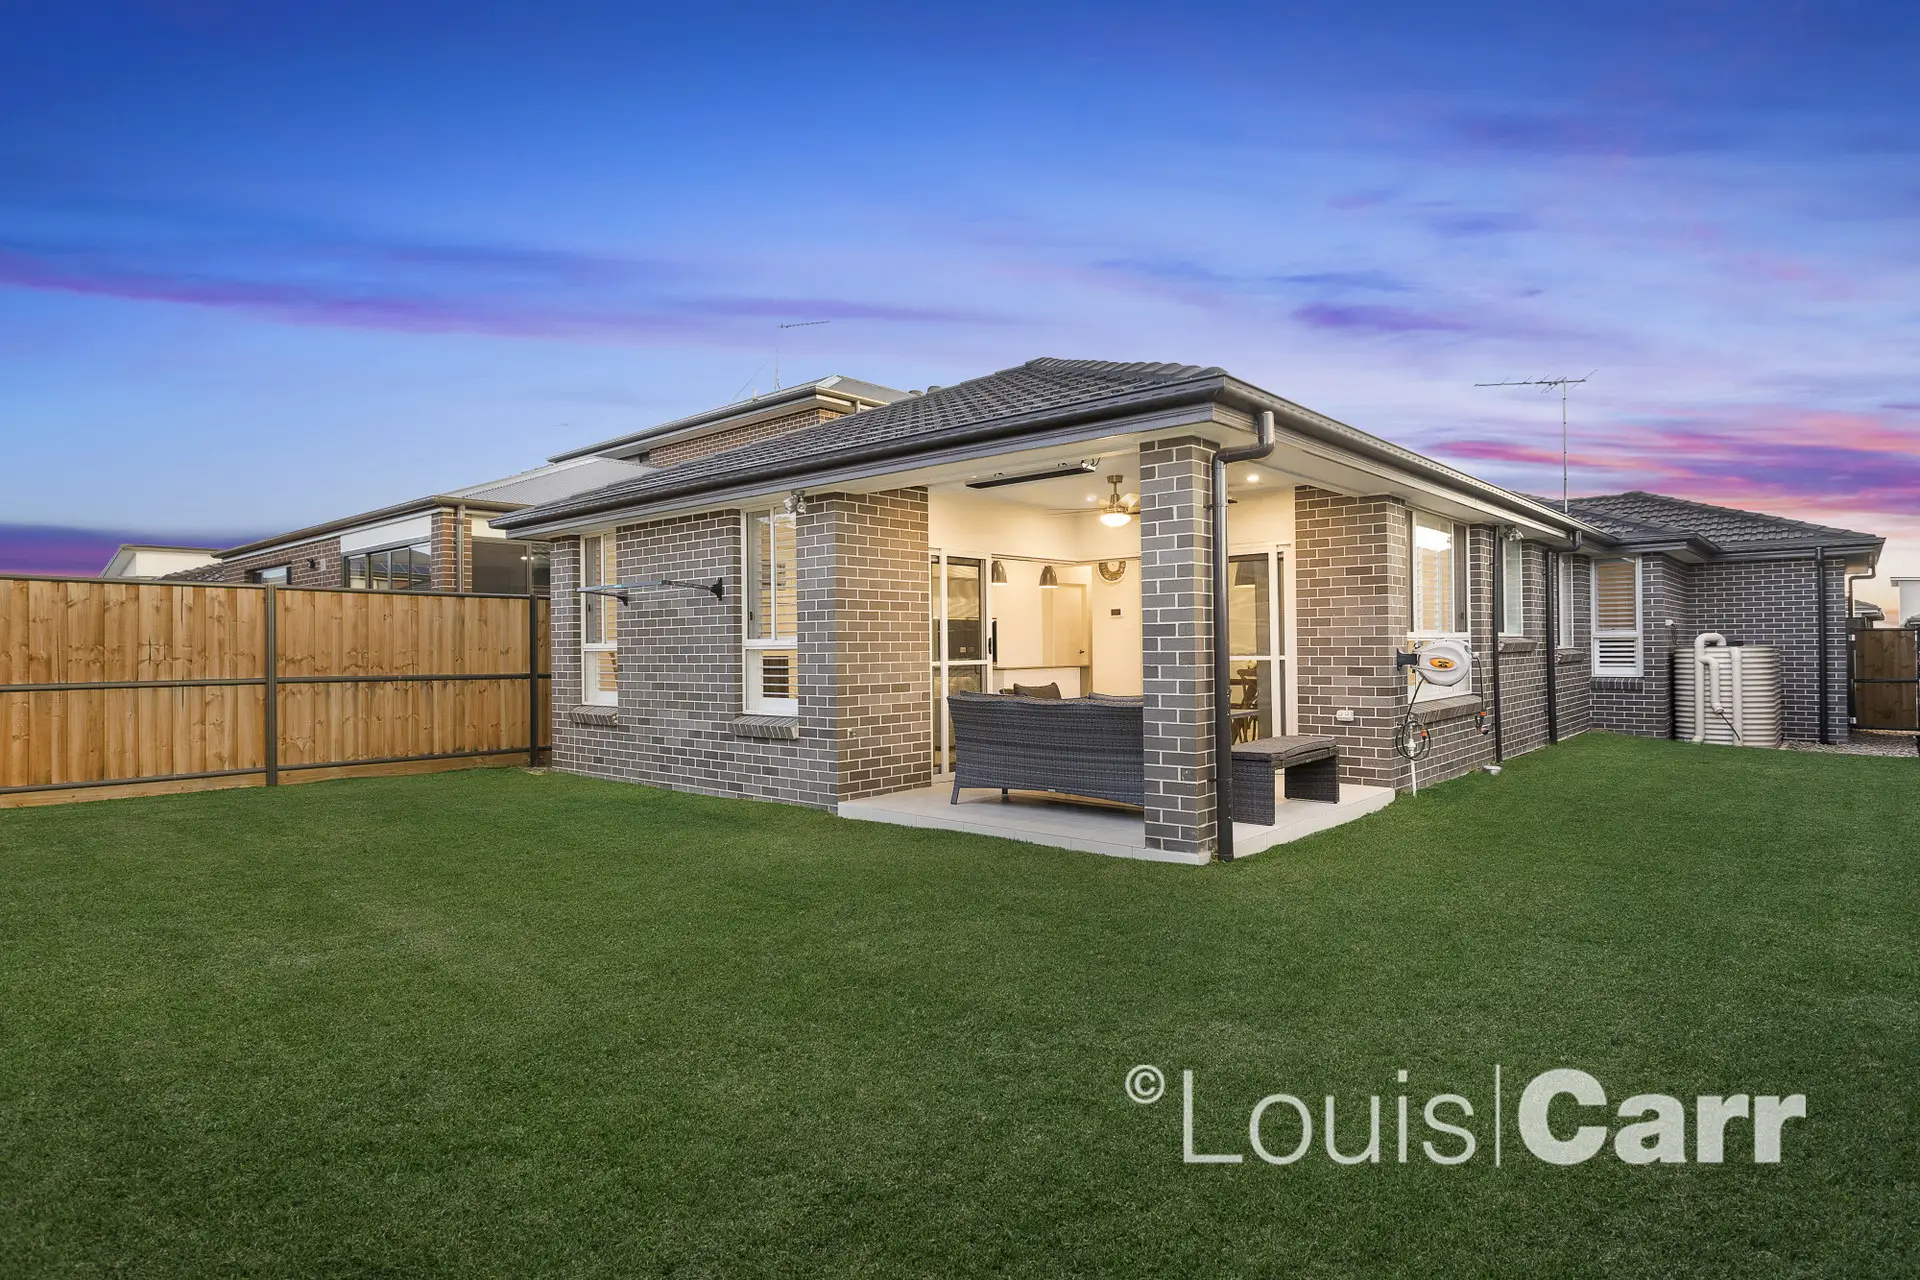 Photo #3: 6 Goongarrie Street, North Kellyville - Sold by Louis Carr Real Estate